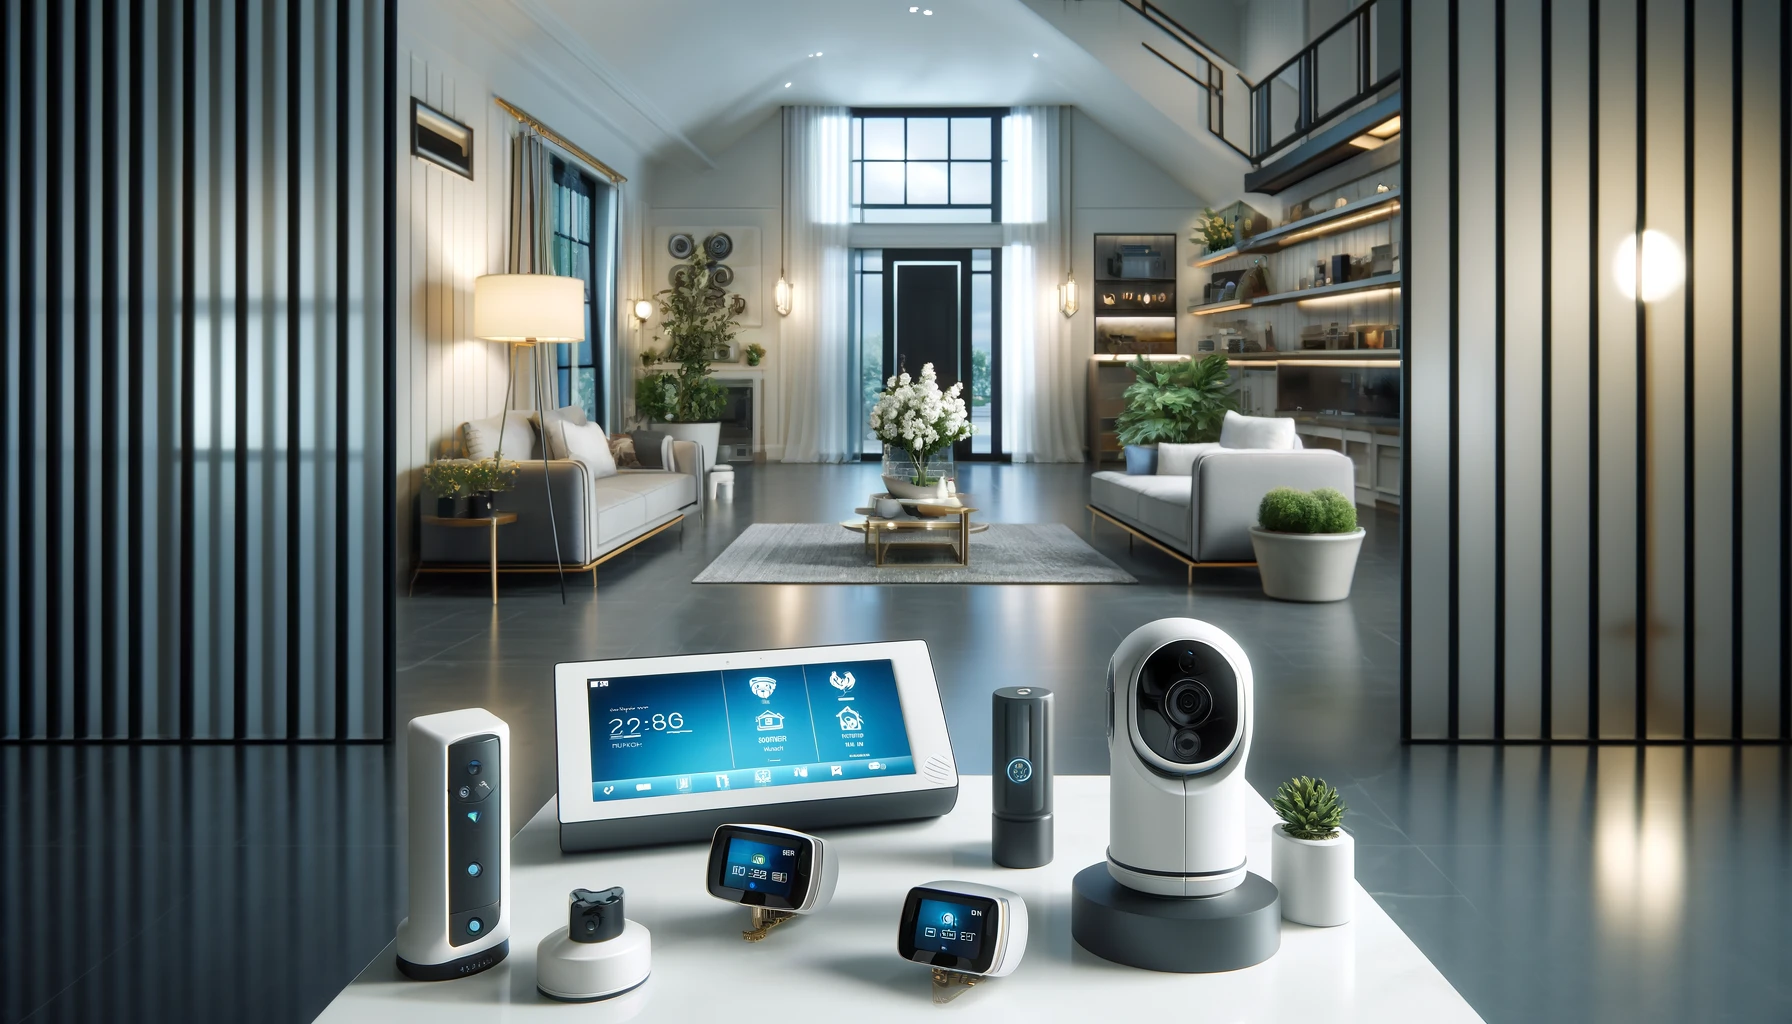 Modern home interior featuring a sophisticated security setup with ADT and Vivint systems, including high-definition surveillance cameras, smart locks, and motion detectors seamlessly integrated into the living space, enhancing both functionality and aesthetics.